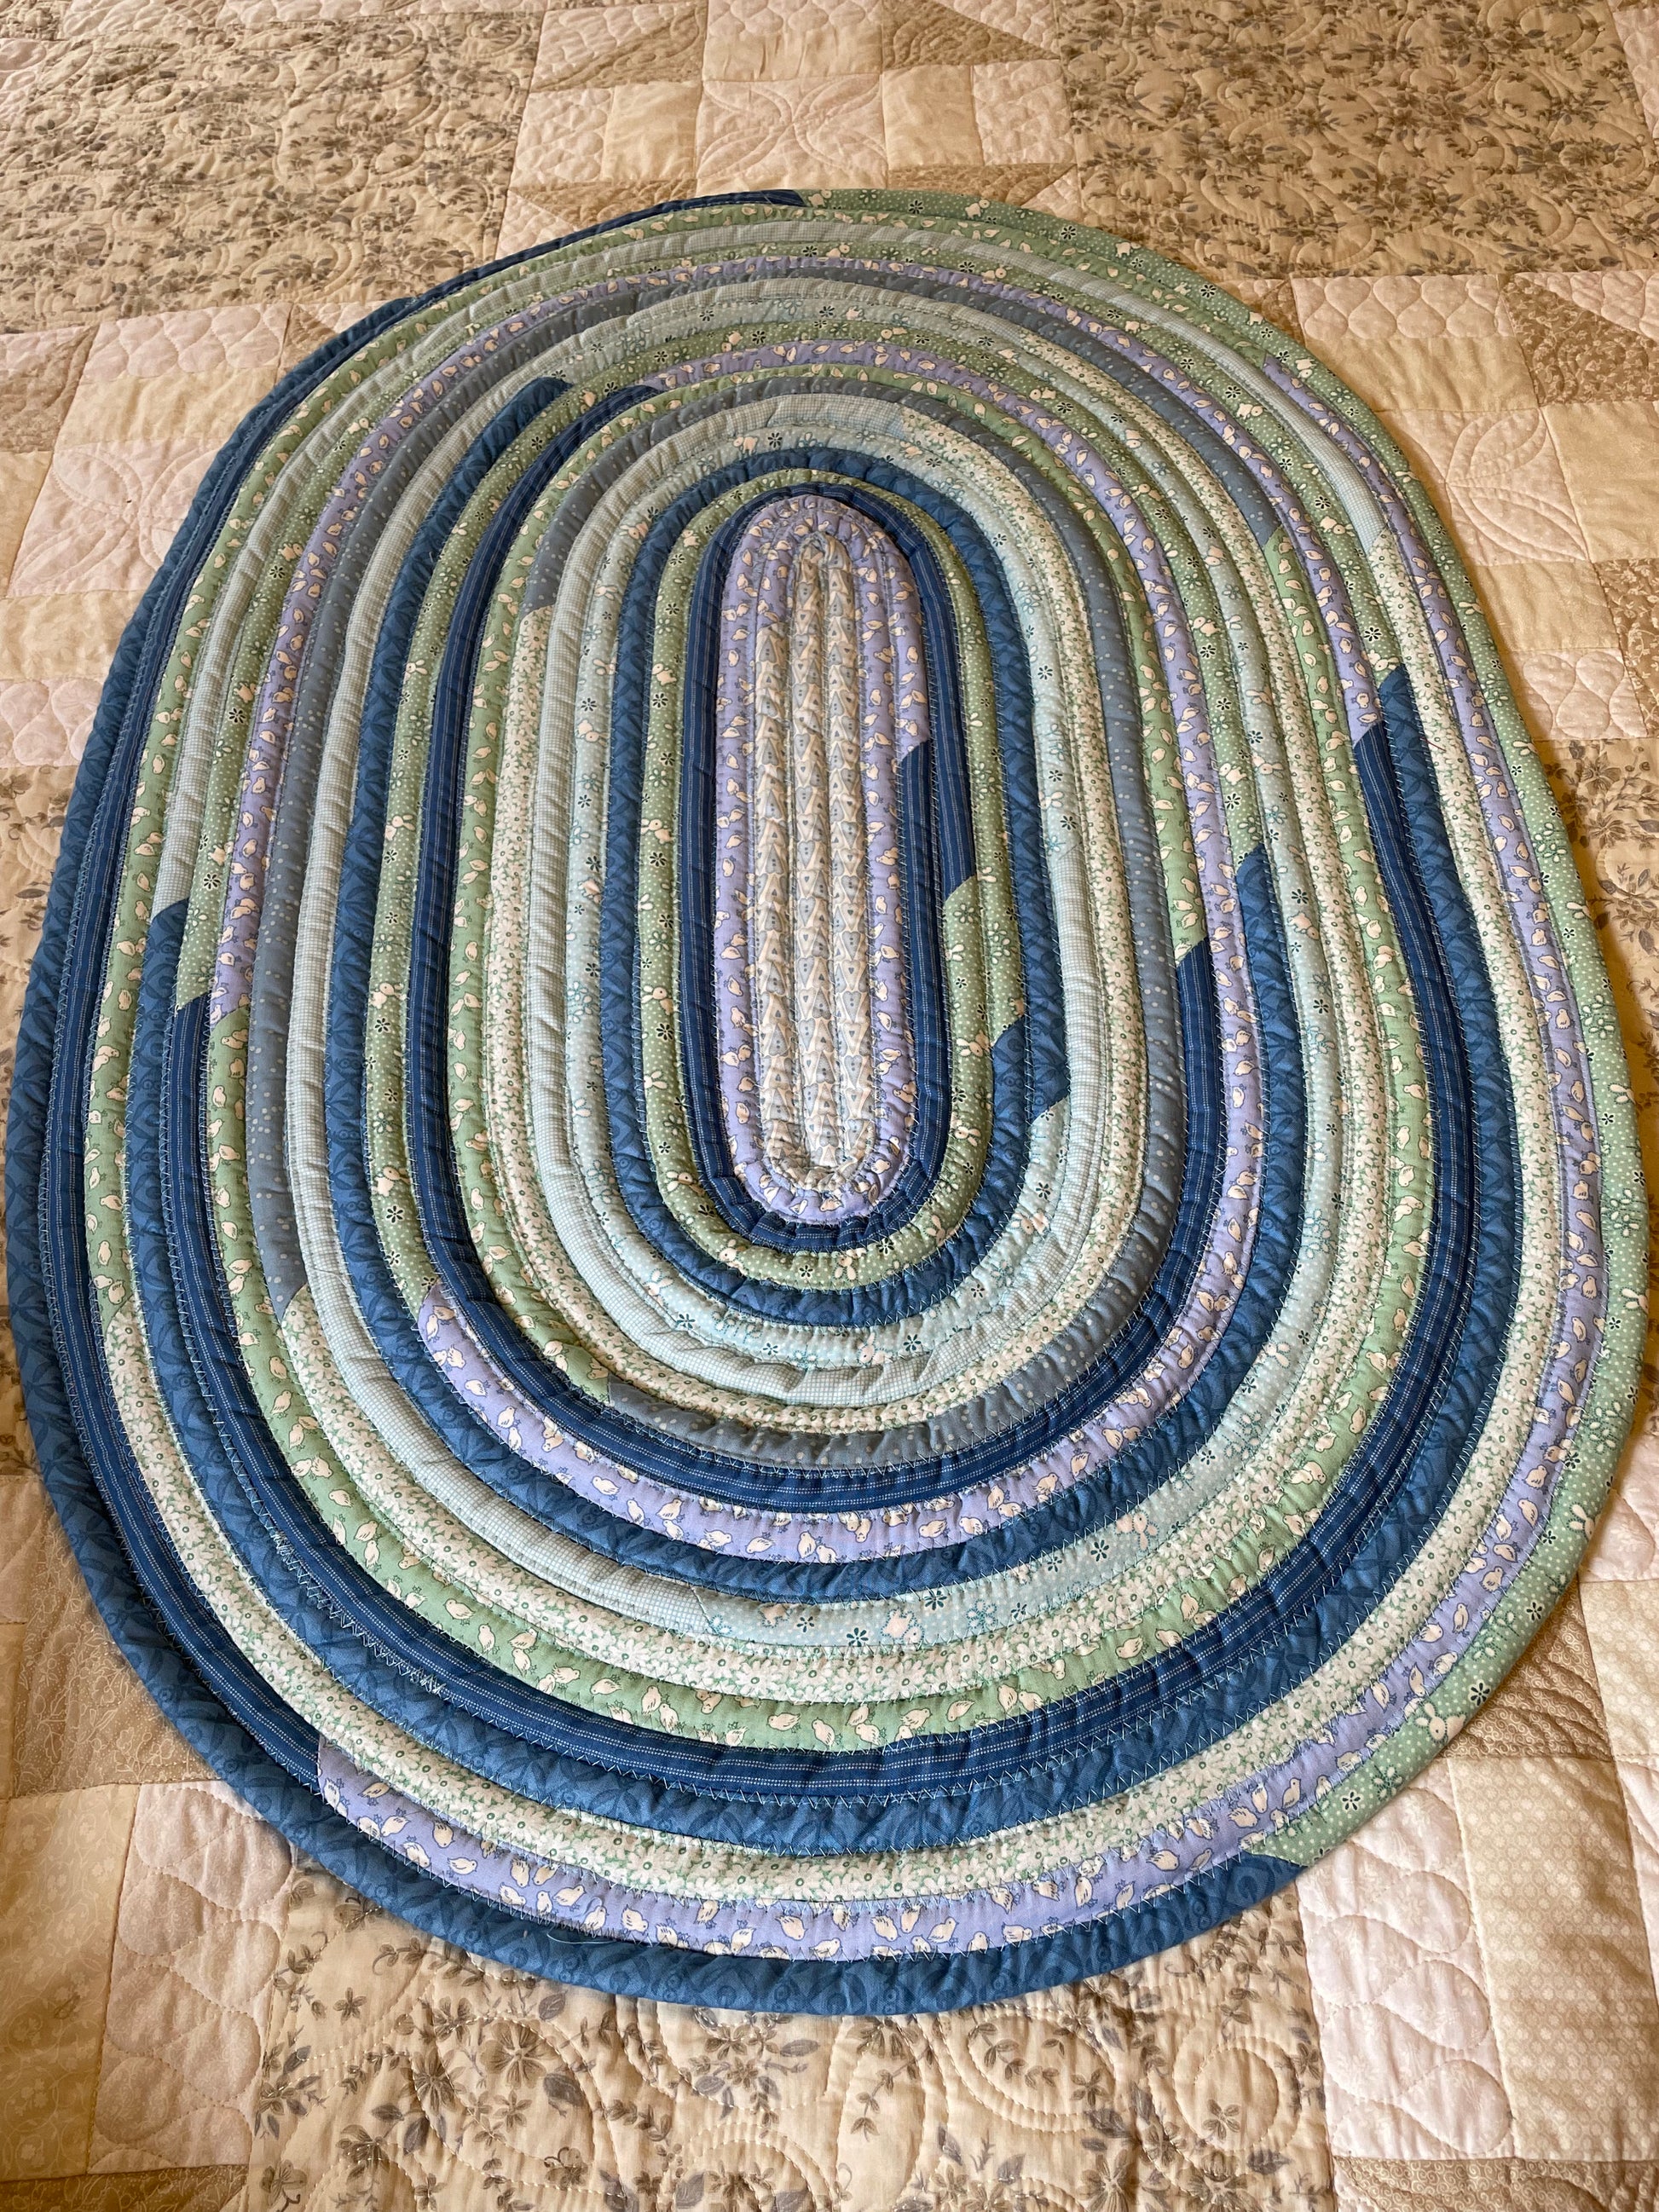 A beautiful blue and green nursery rug is the perfect way to bring life and color to any nursery. Whether in soft and subtle hues or bold and eye-catching shades, this rug will add a unique and special touch to any baby's room. Made from high-quality materials, this rug will provide warmth and comfort to both baby and parents. The easy to clean surface makes this rug a great choice for both parents and children. Enjoy the perfect combination of style and function with the blue and green nursery rug.